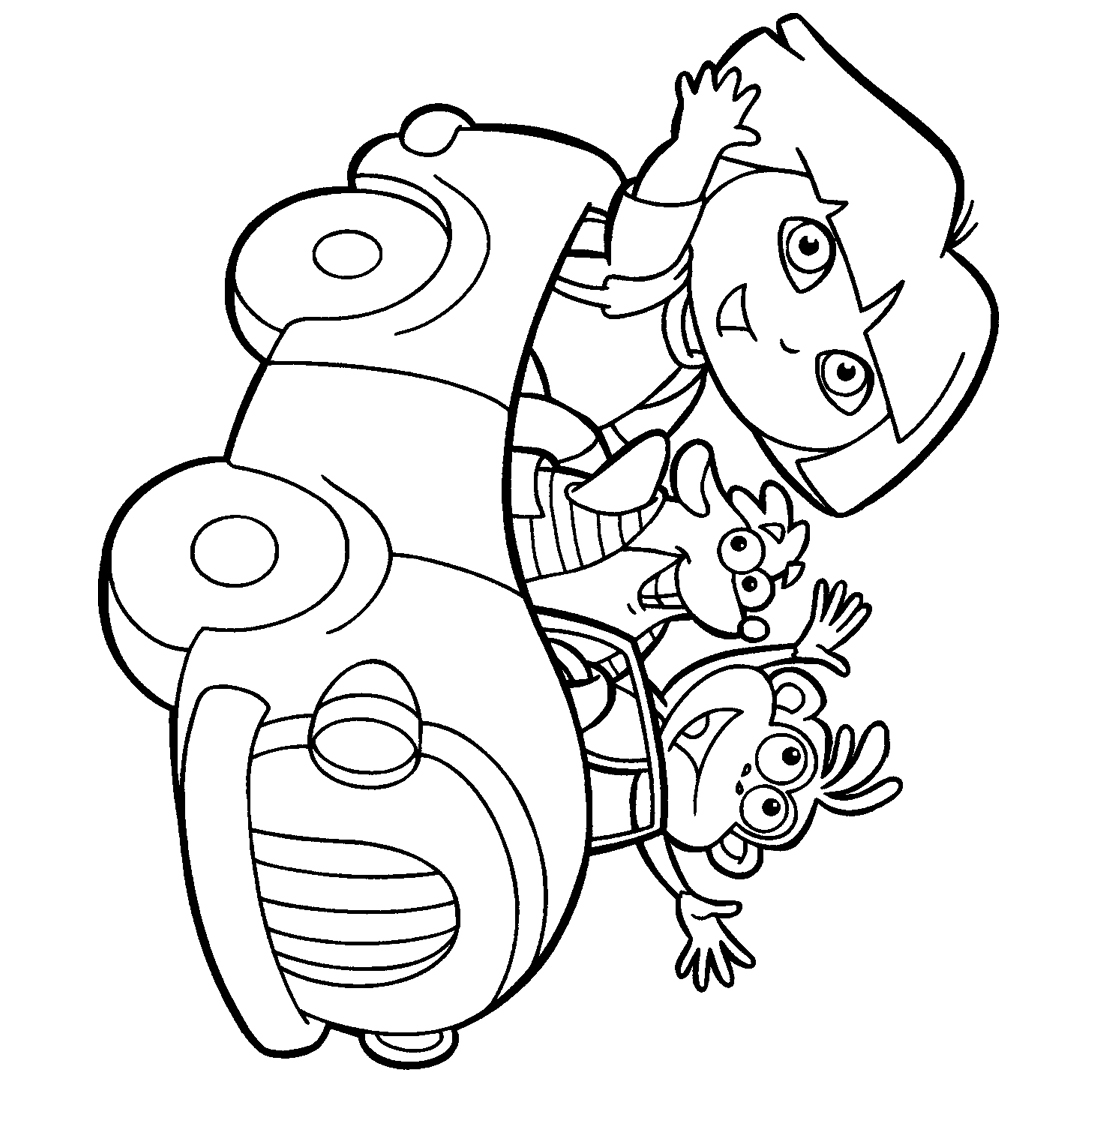  Awesome Coloring Pages For Teenagers   4